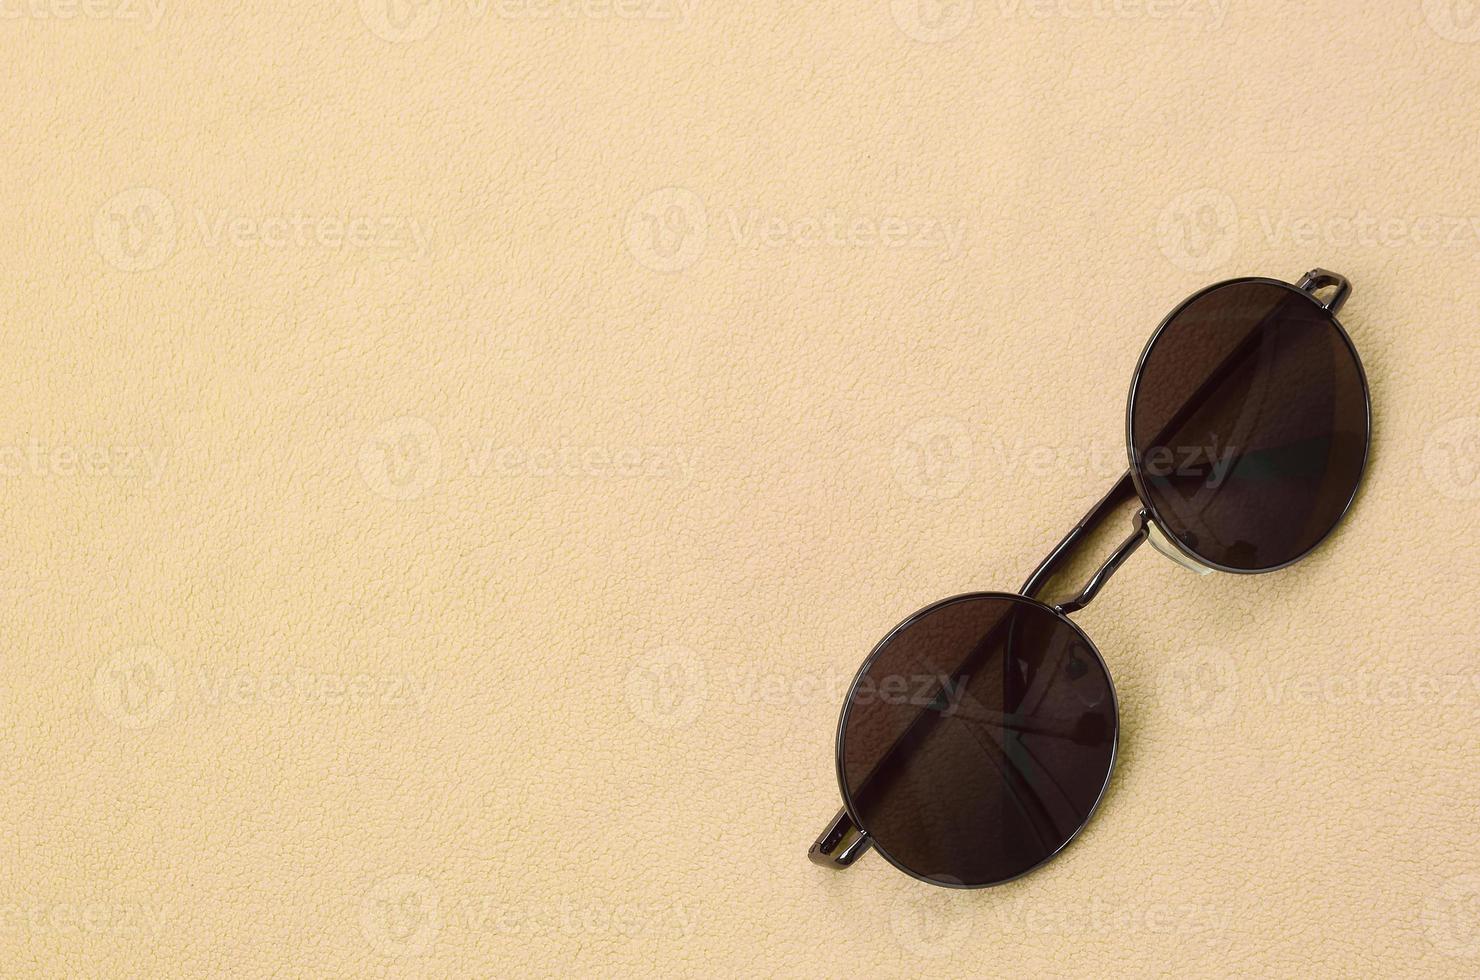 Stylish black sunglasses with round glasses lies on a blanket made of soft and fluffy light orange fleece fabric. Fashionable background picture in fashion colors photo